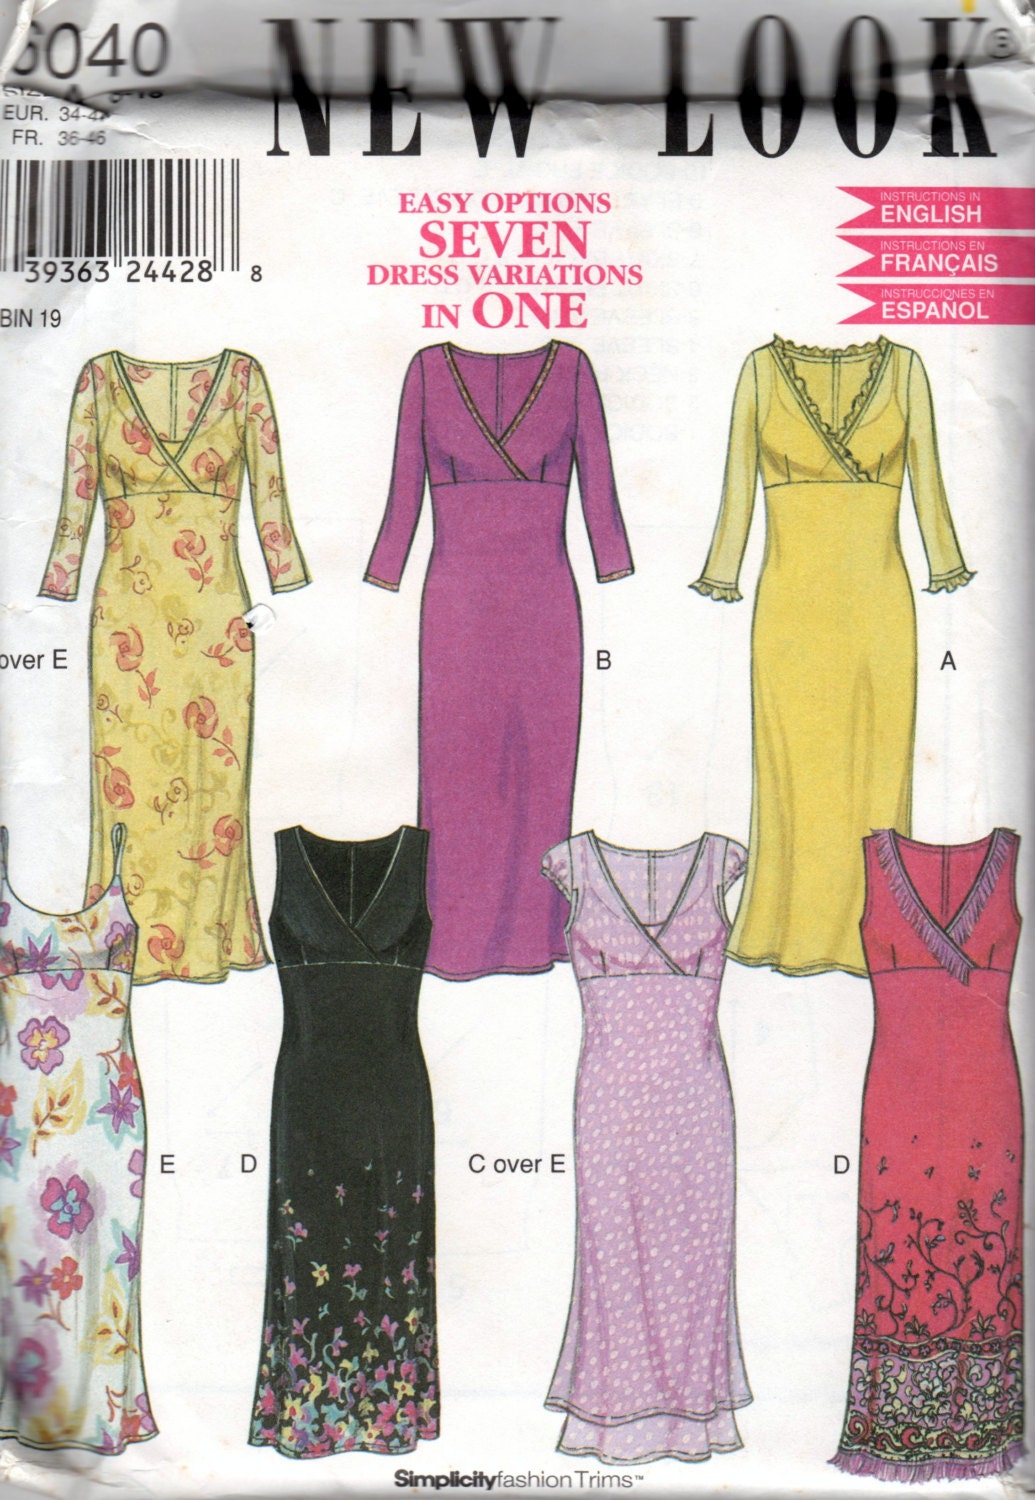 6040 New Look Simplicity Uncut Sewing Pattern Misses Dress